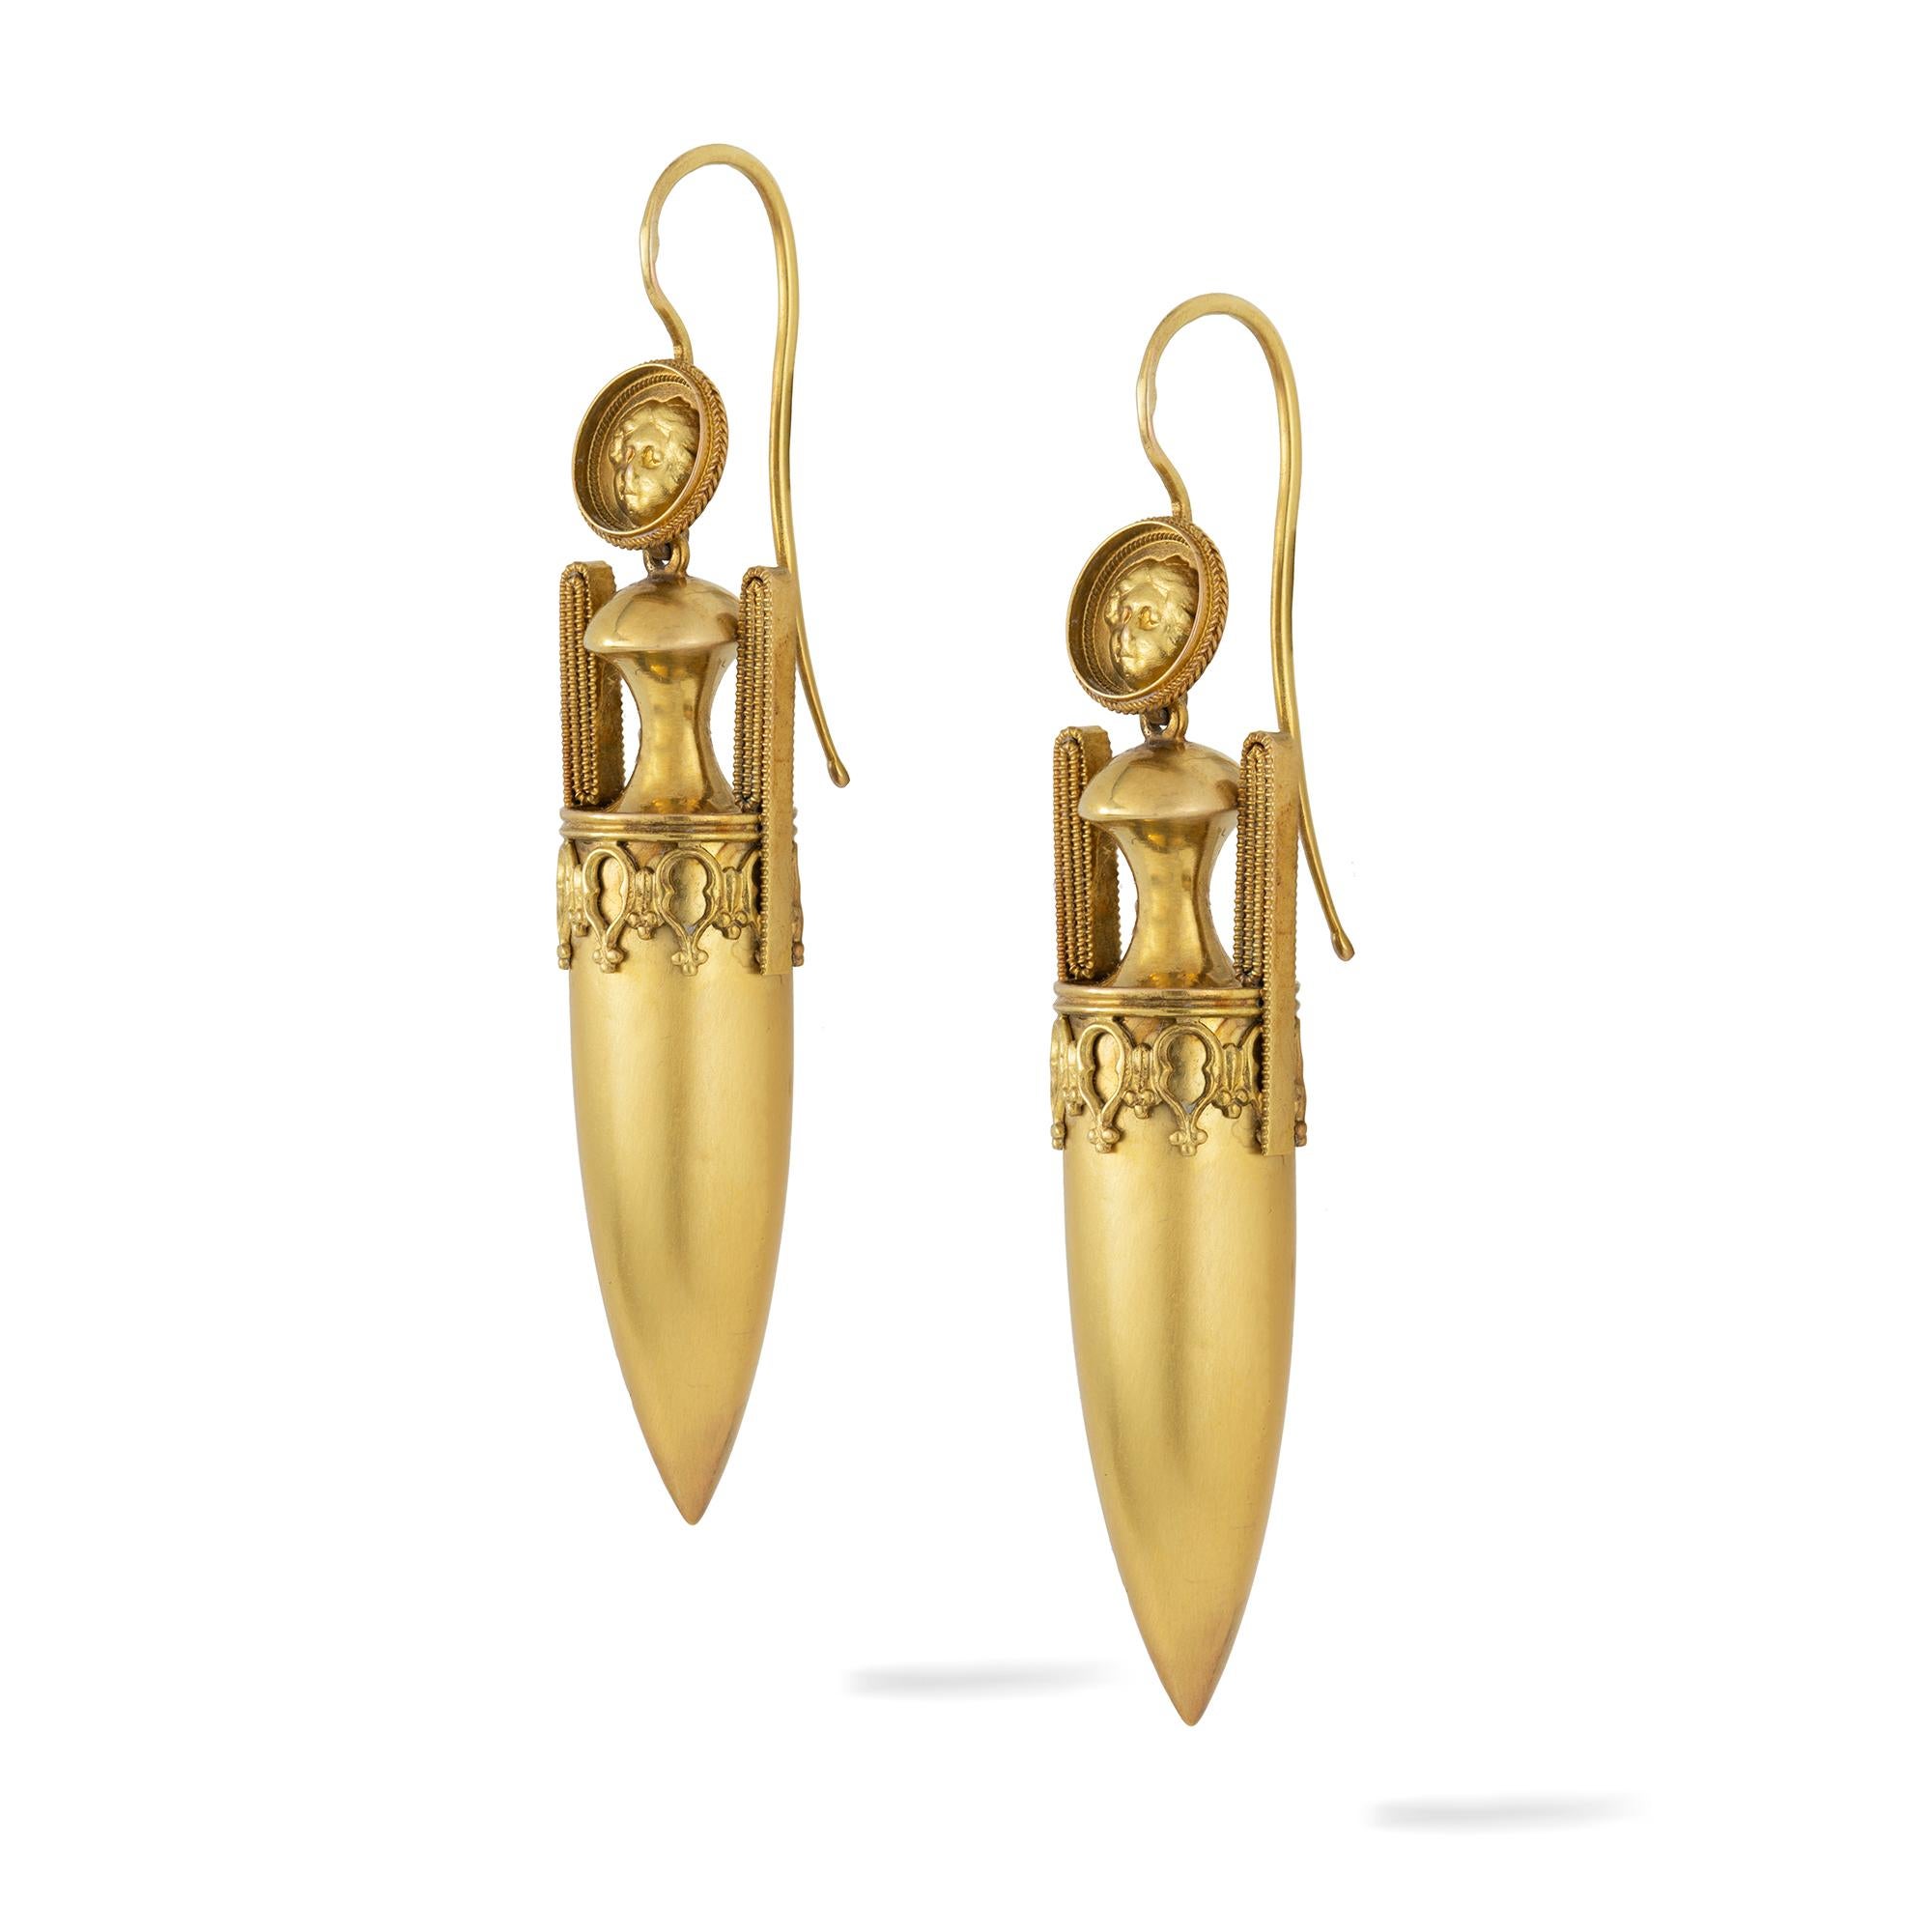 A pair of Etruscan revival gold amphora drop earrings, the yellow disk depicting the face of medusa set to hook fitting, suspending an amphora with wire-work decorations, circa 1870, earrings measuring approximately 5.7 x 1.2cm, gross weight 8.4